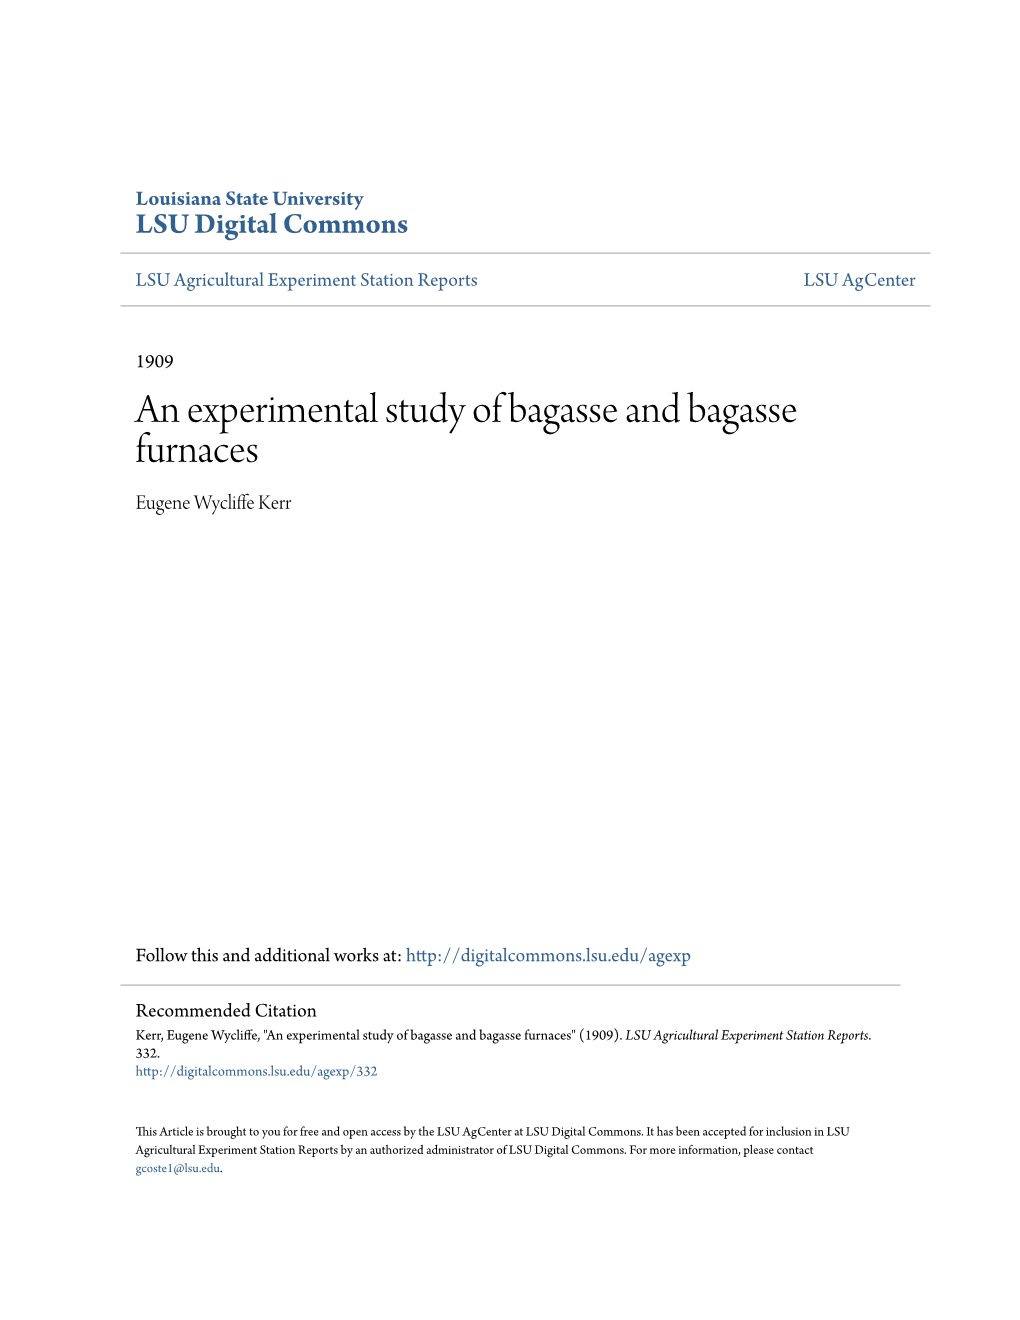 An Experimental Study of Bagasse and Bagasse Furnaces Eugene Wycliffe Kerr